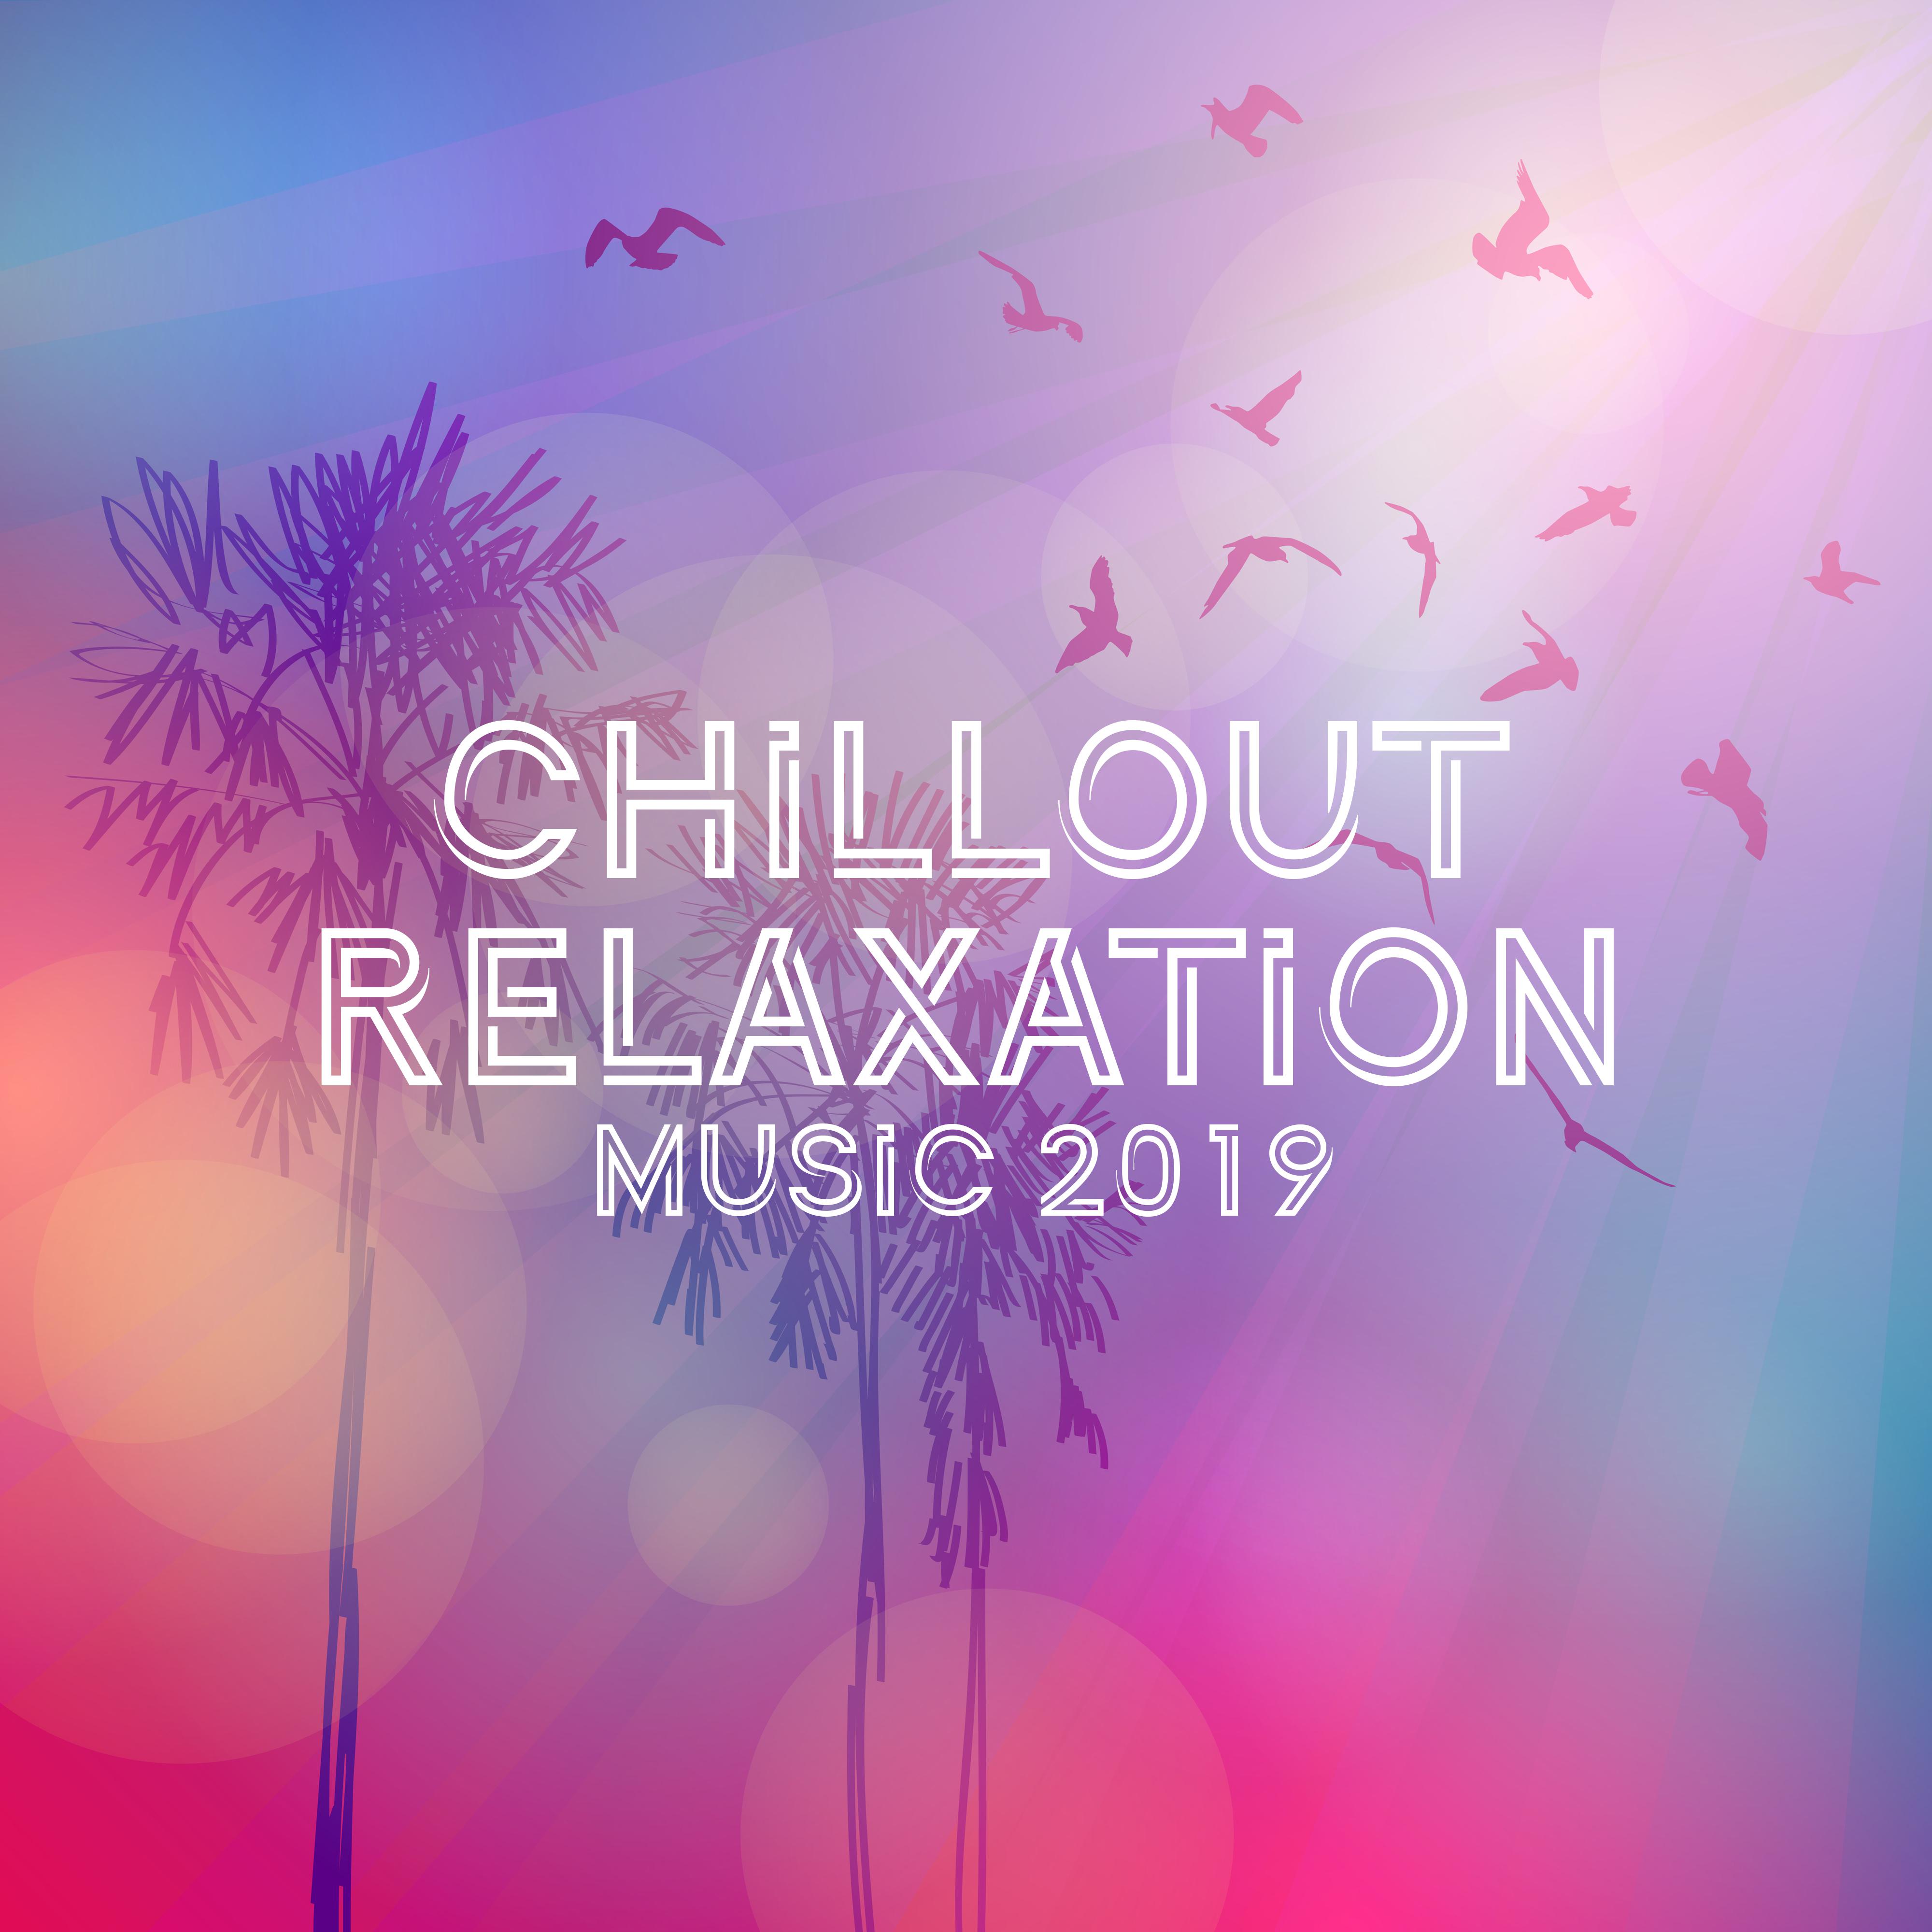 Chillout Relaxation Music 2019 - Reduce Stress, Relax and Unwind with the Best Chillout Pieces of This Summer